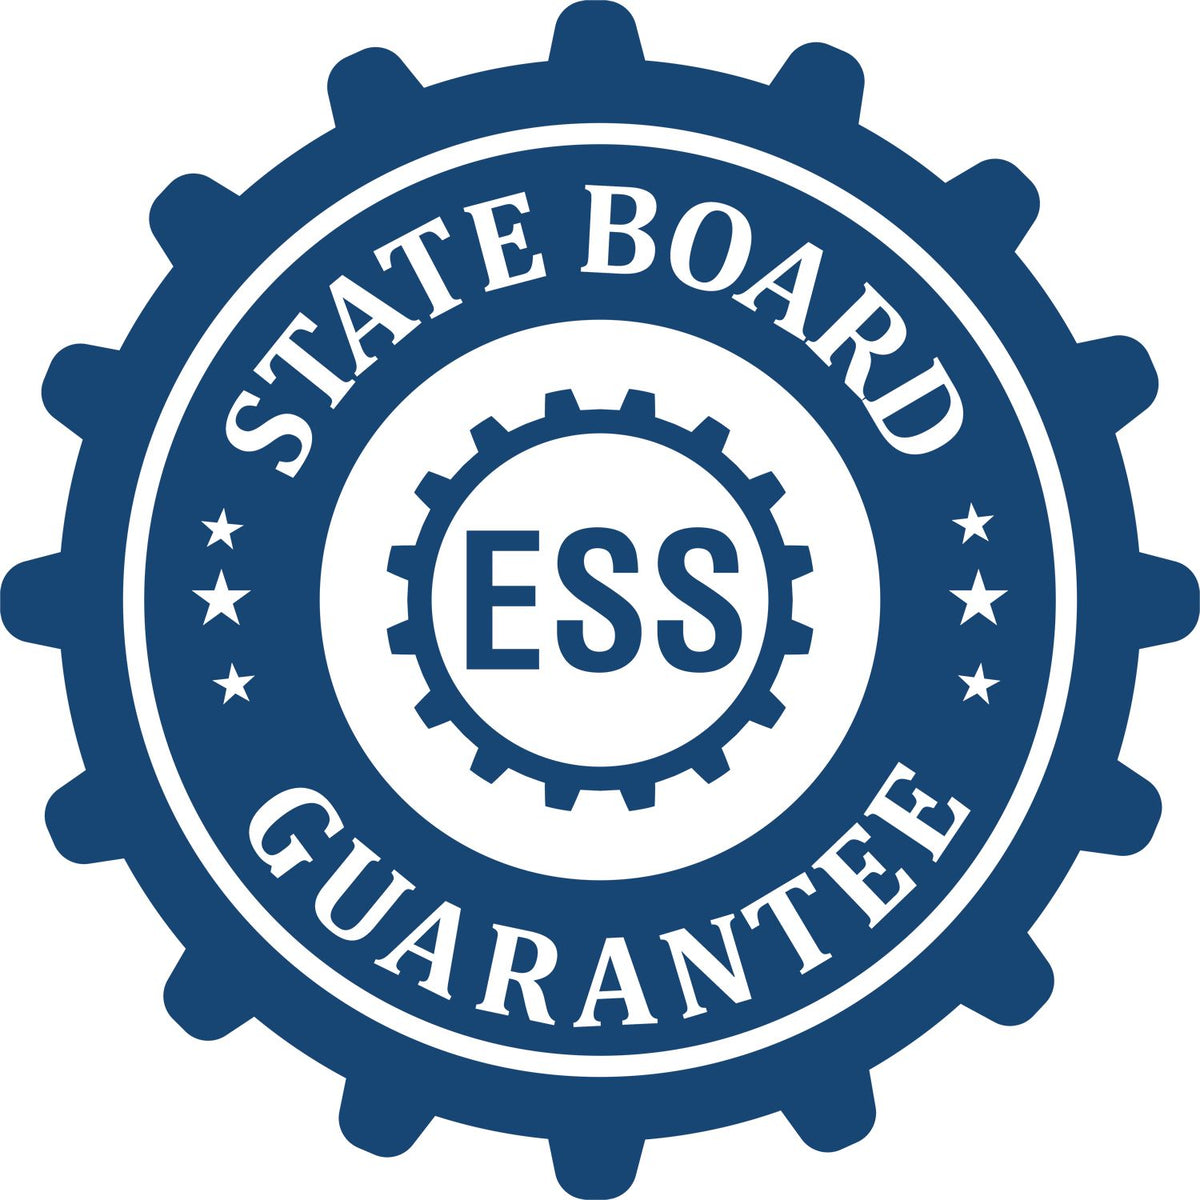 An emblem in a gear shape illustrating a state board guarantee for the Indiana Professional Engineer Seal Stamp product.